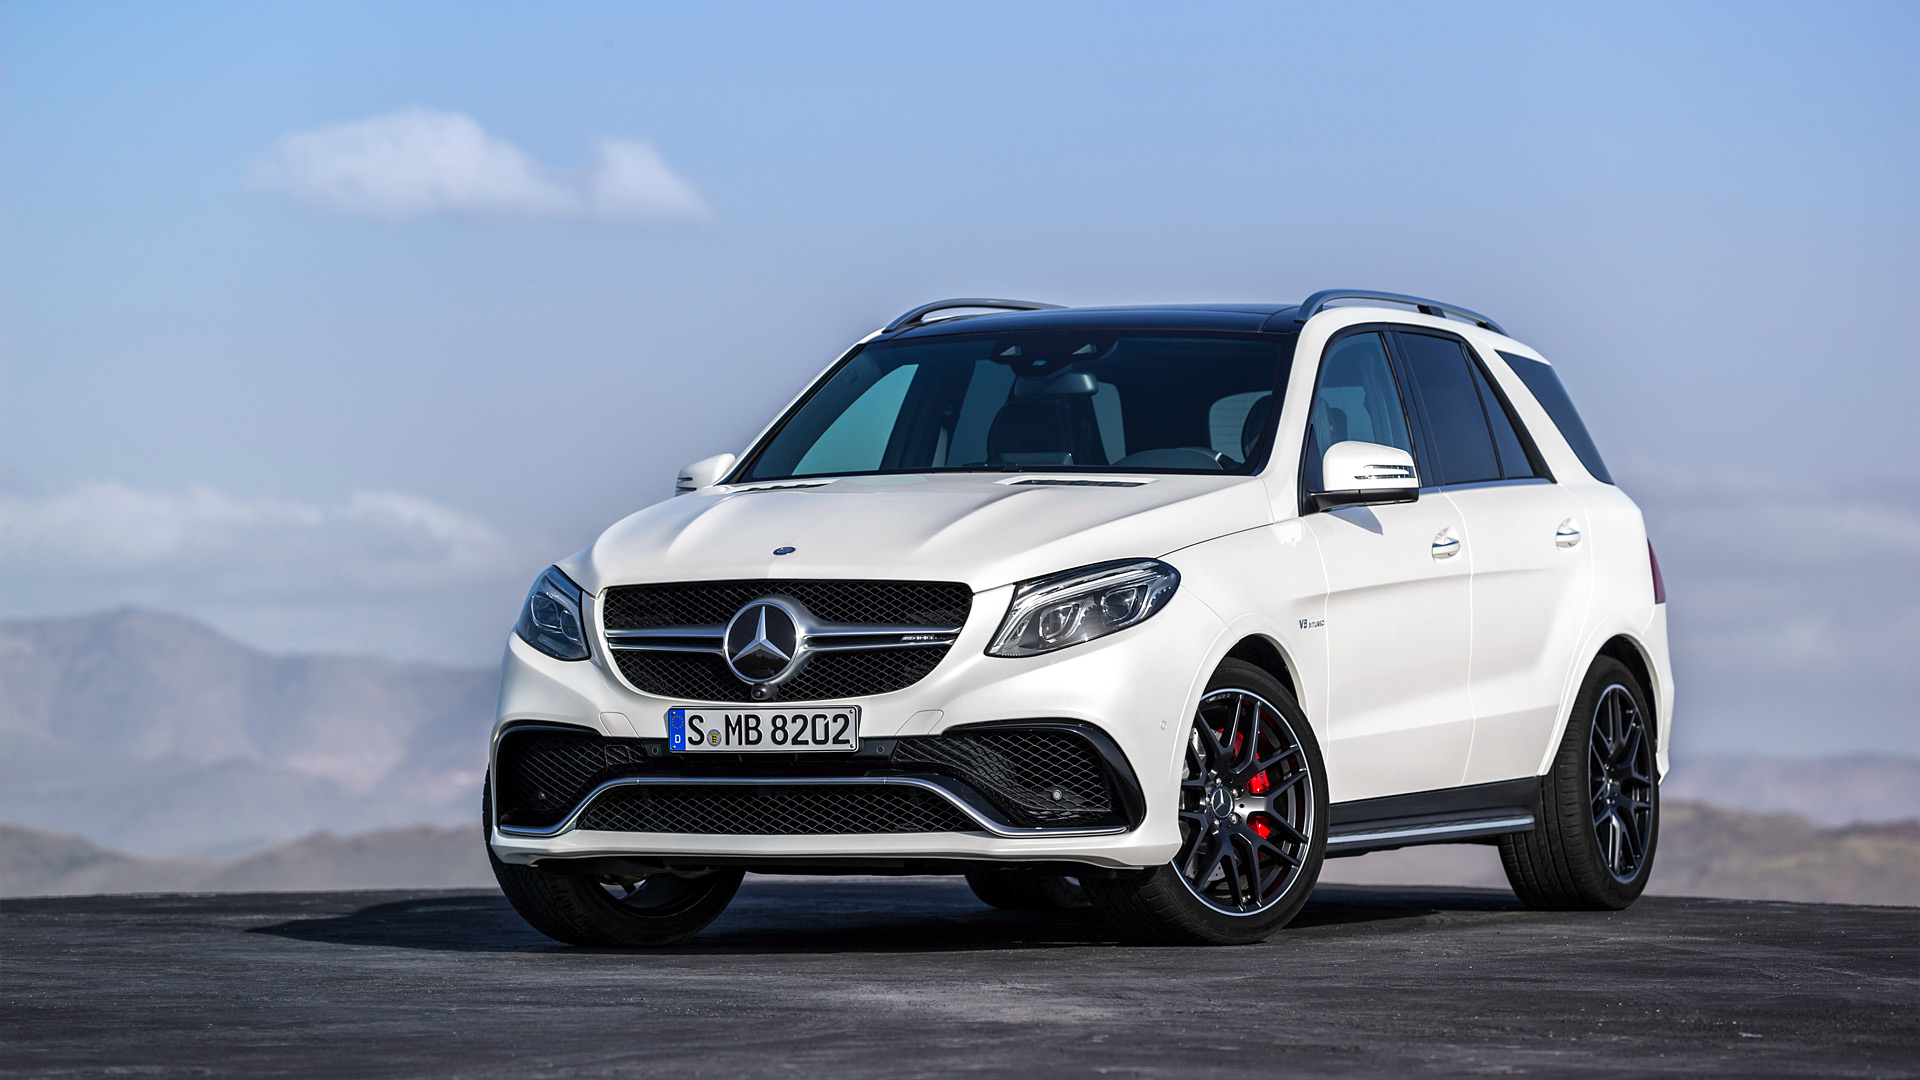 Mercedes Benz Gle Amg Wallpaper HD Image Wsupercars